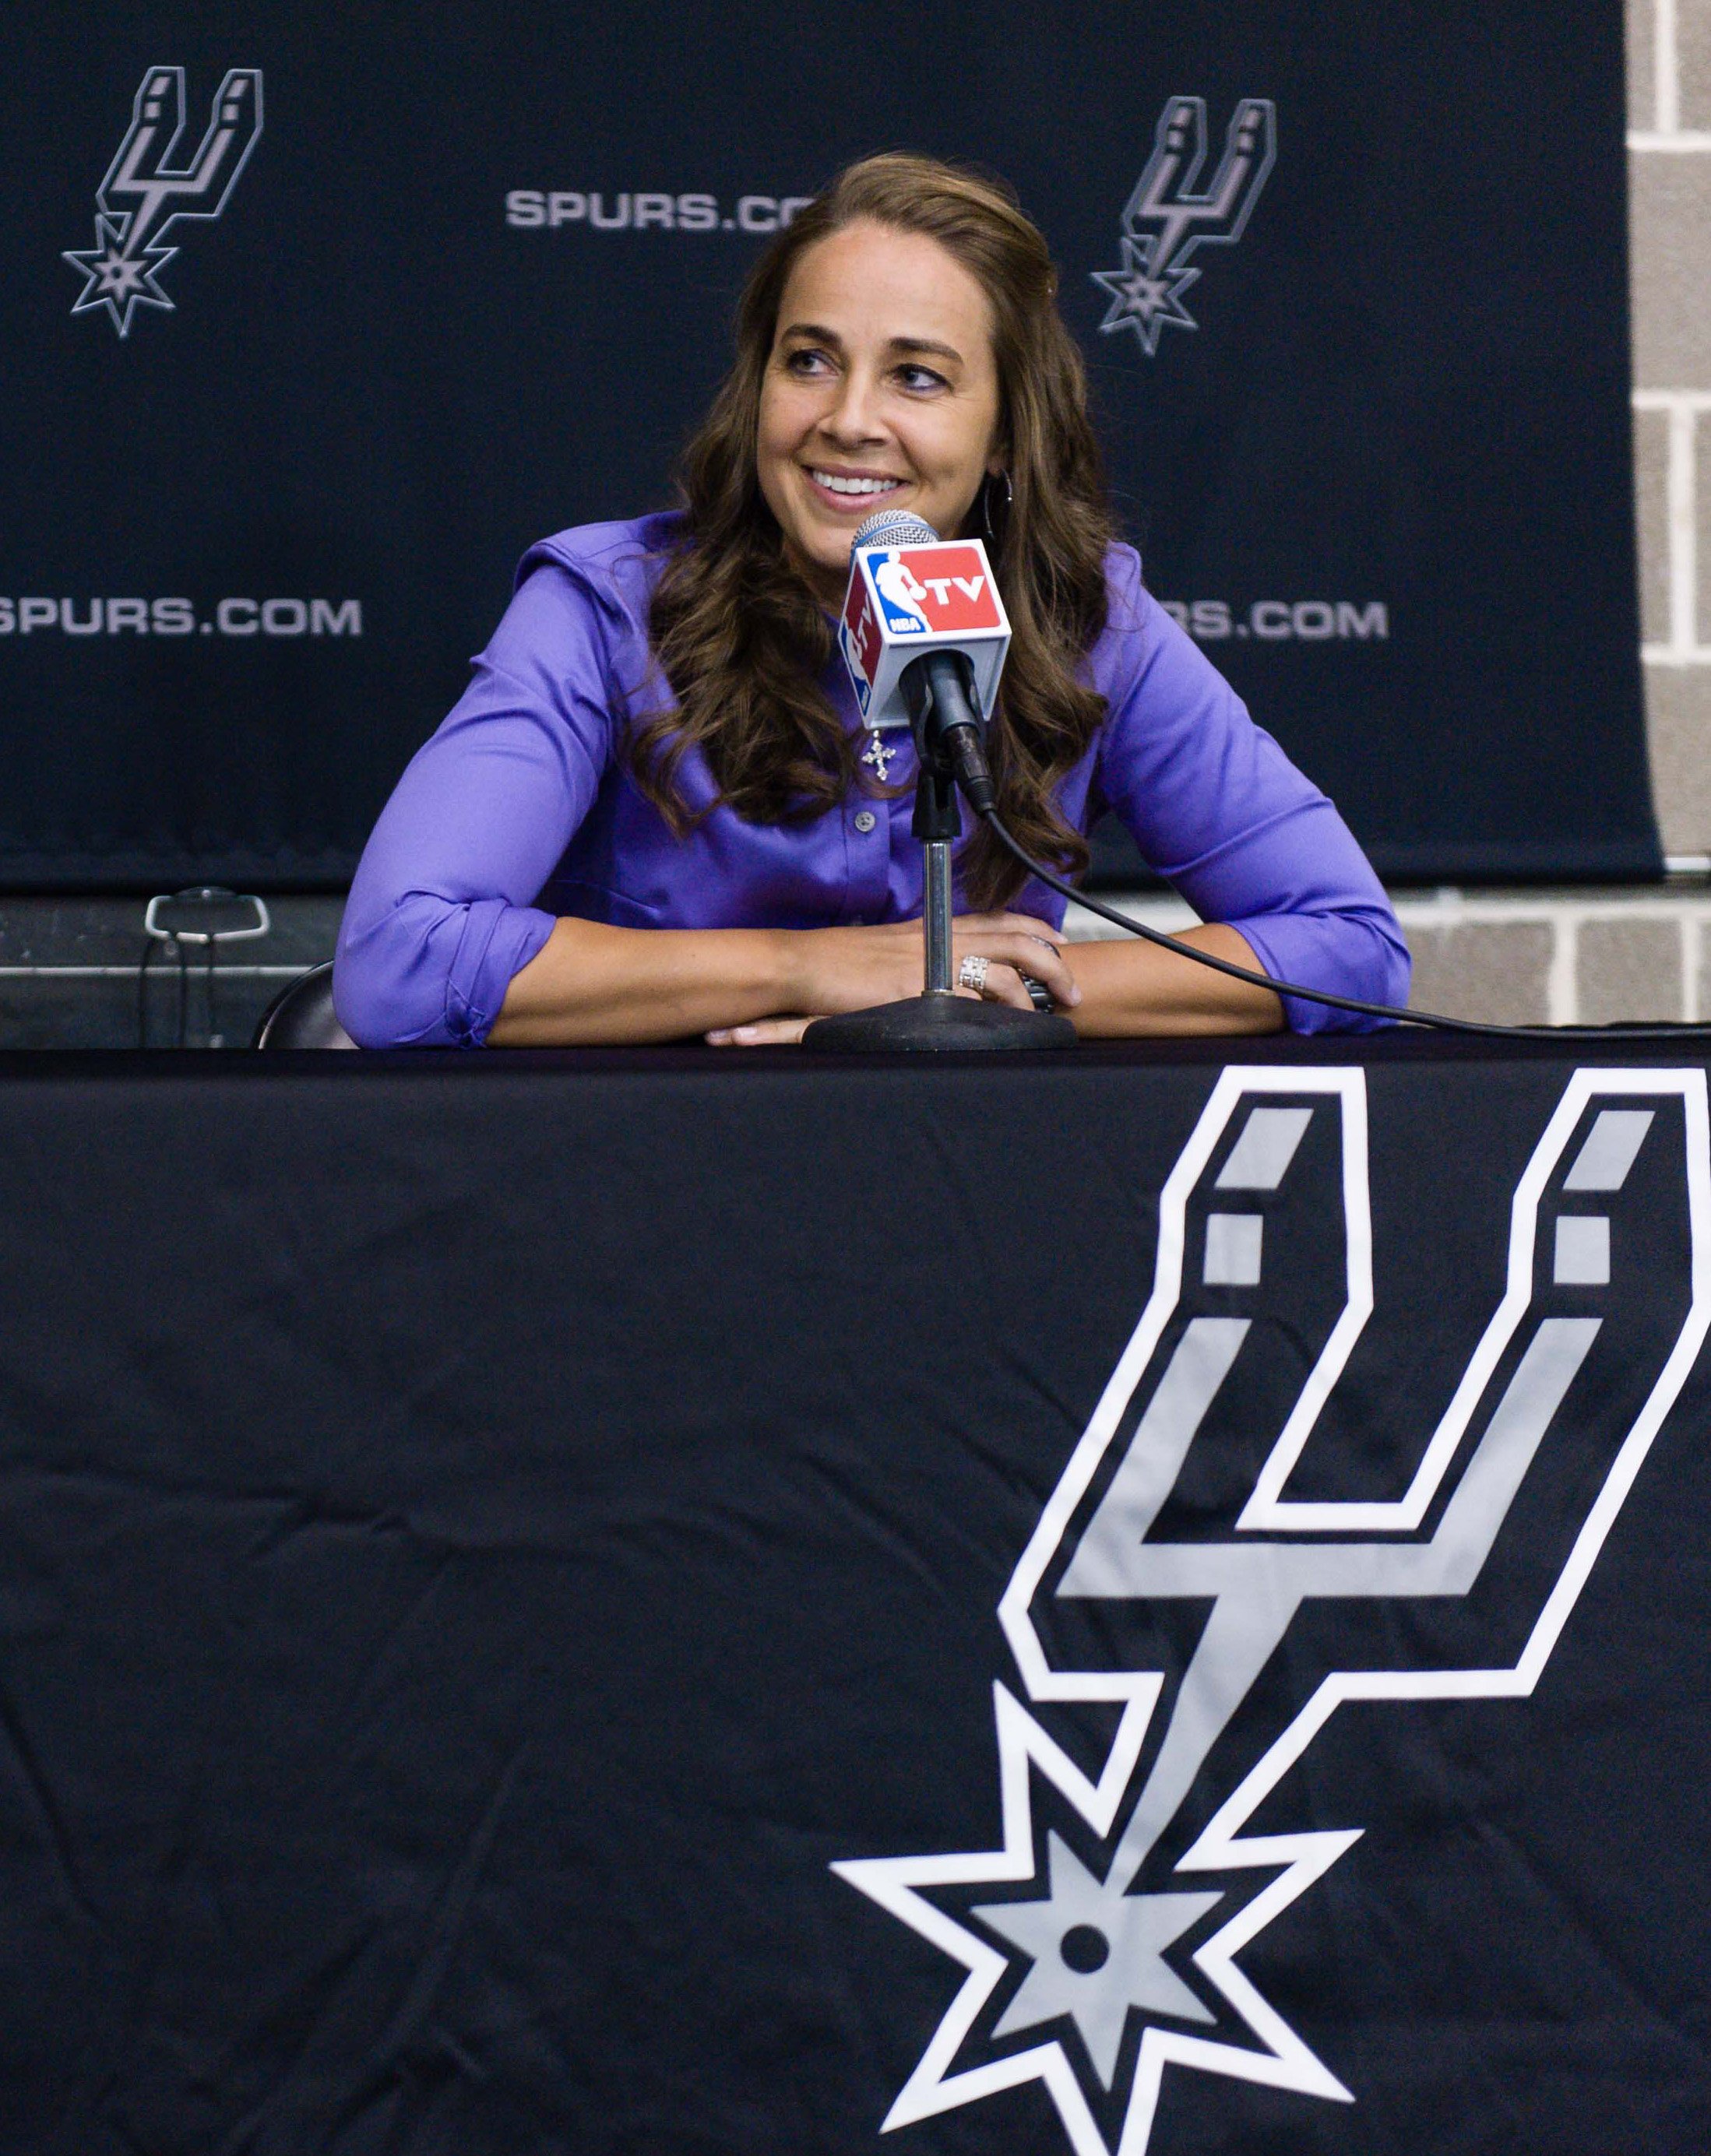 WNBA star Becky Hammon takes questions from the media at the San Antonio Spurs practice facility after being introduced as an assistant coach with the team on Tuesday, Aug. 5, 2014 in San Antonio. 